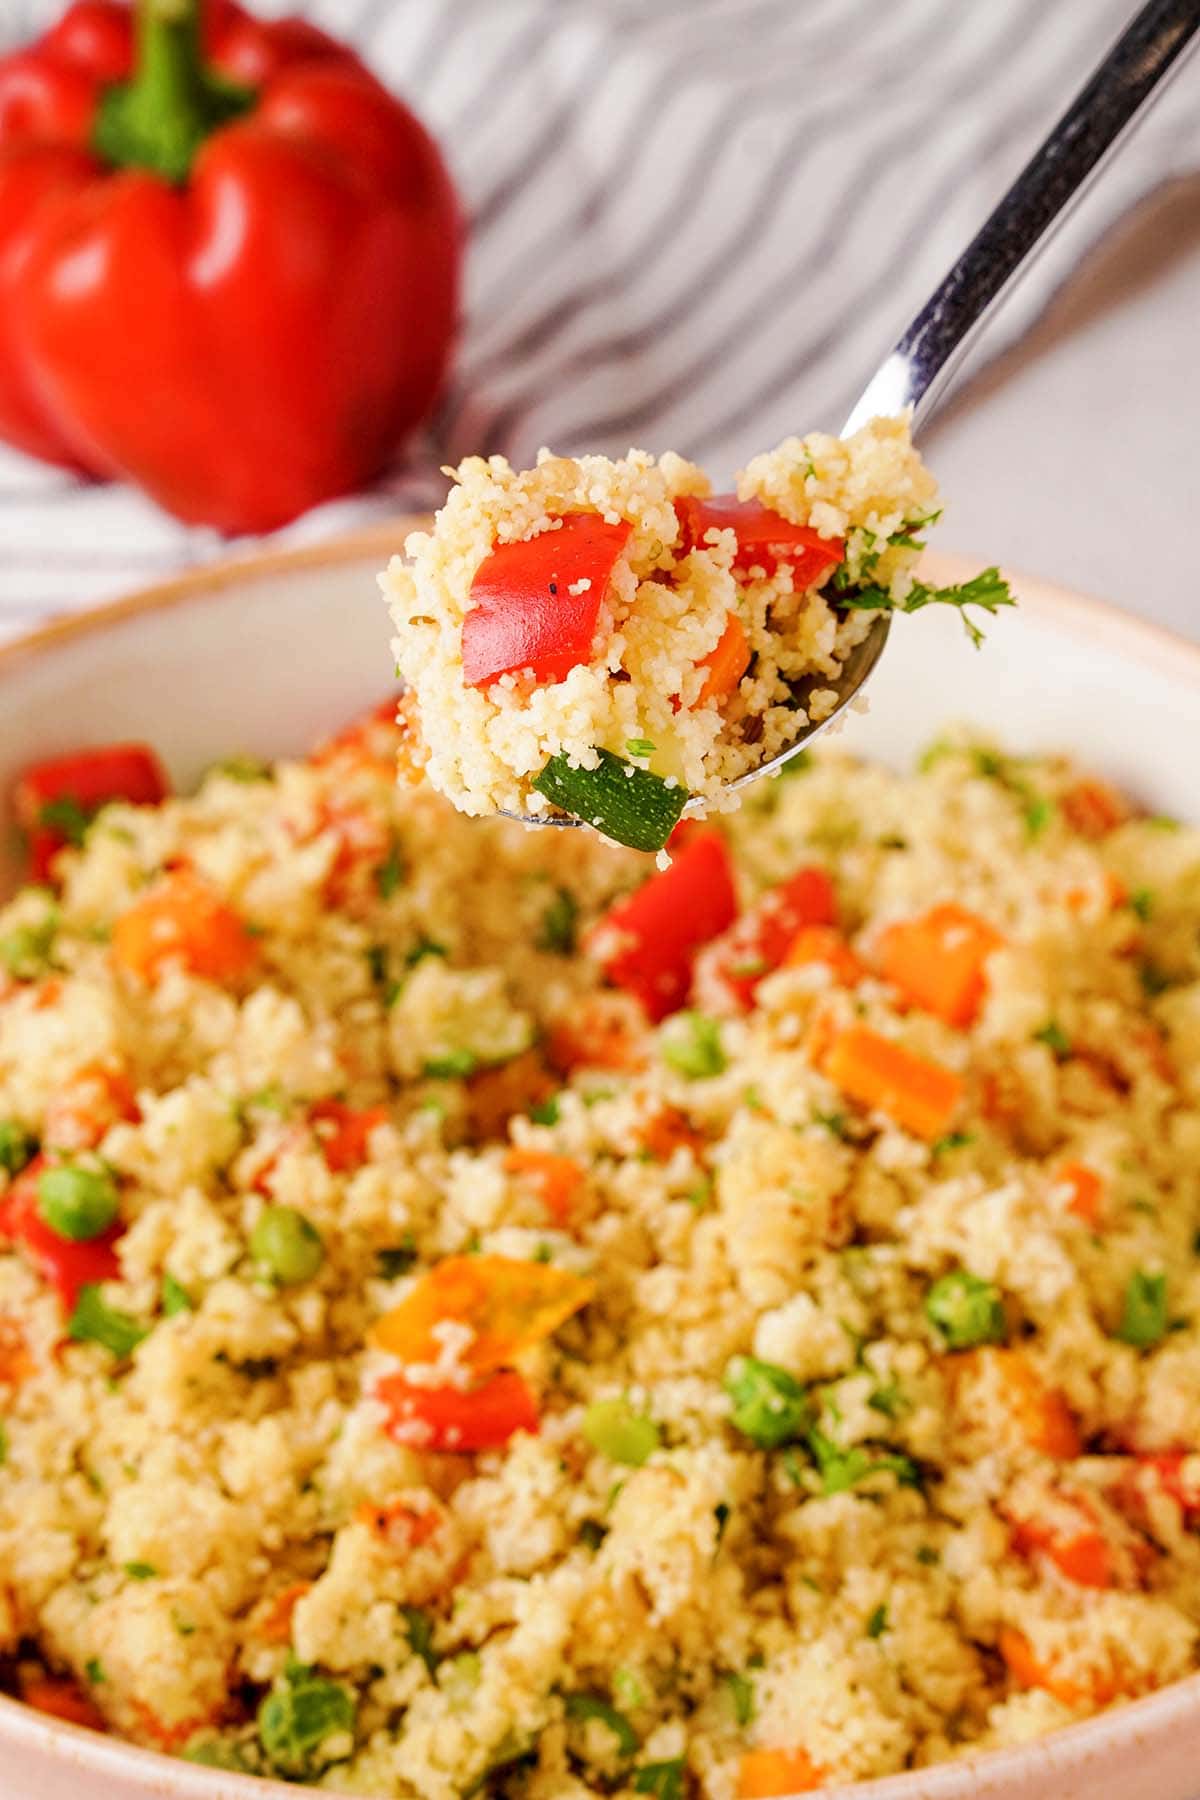 spoonful of couscous with vegetables.